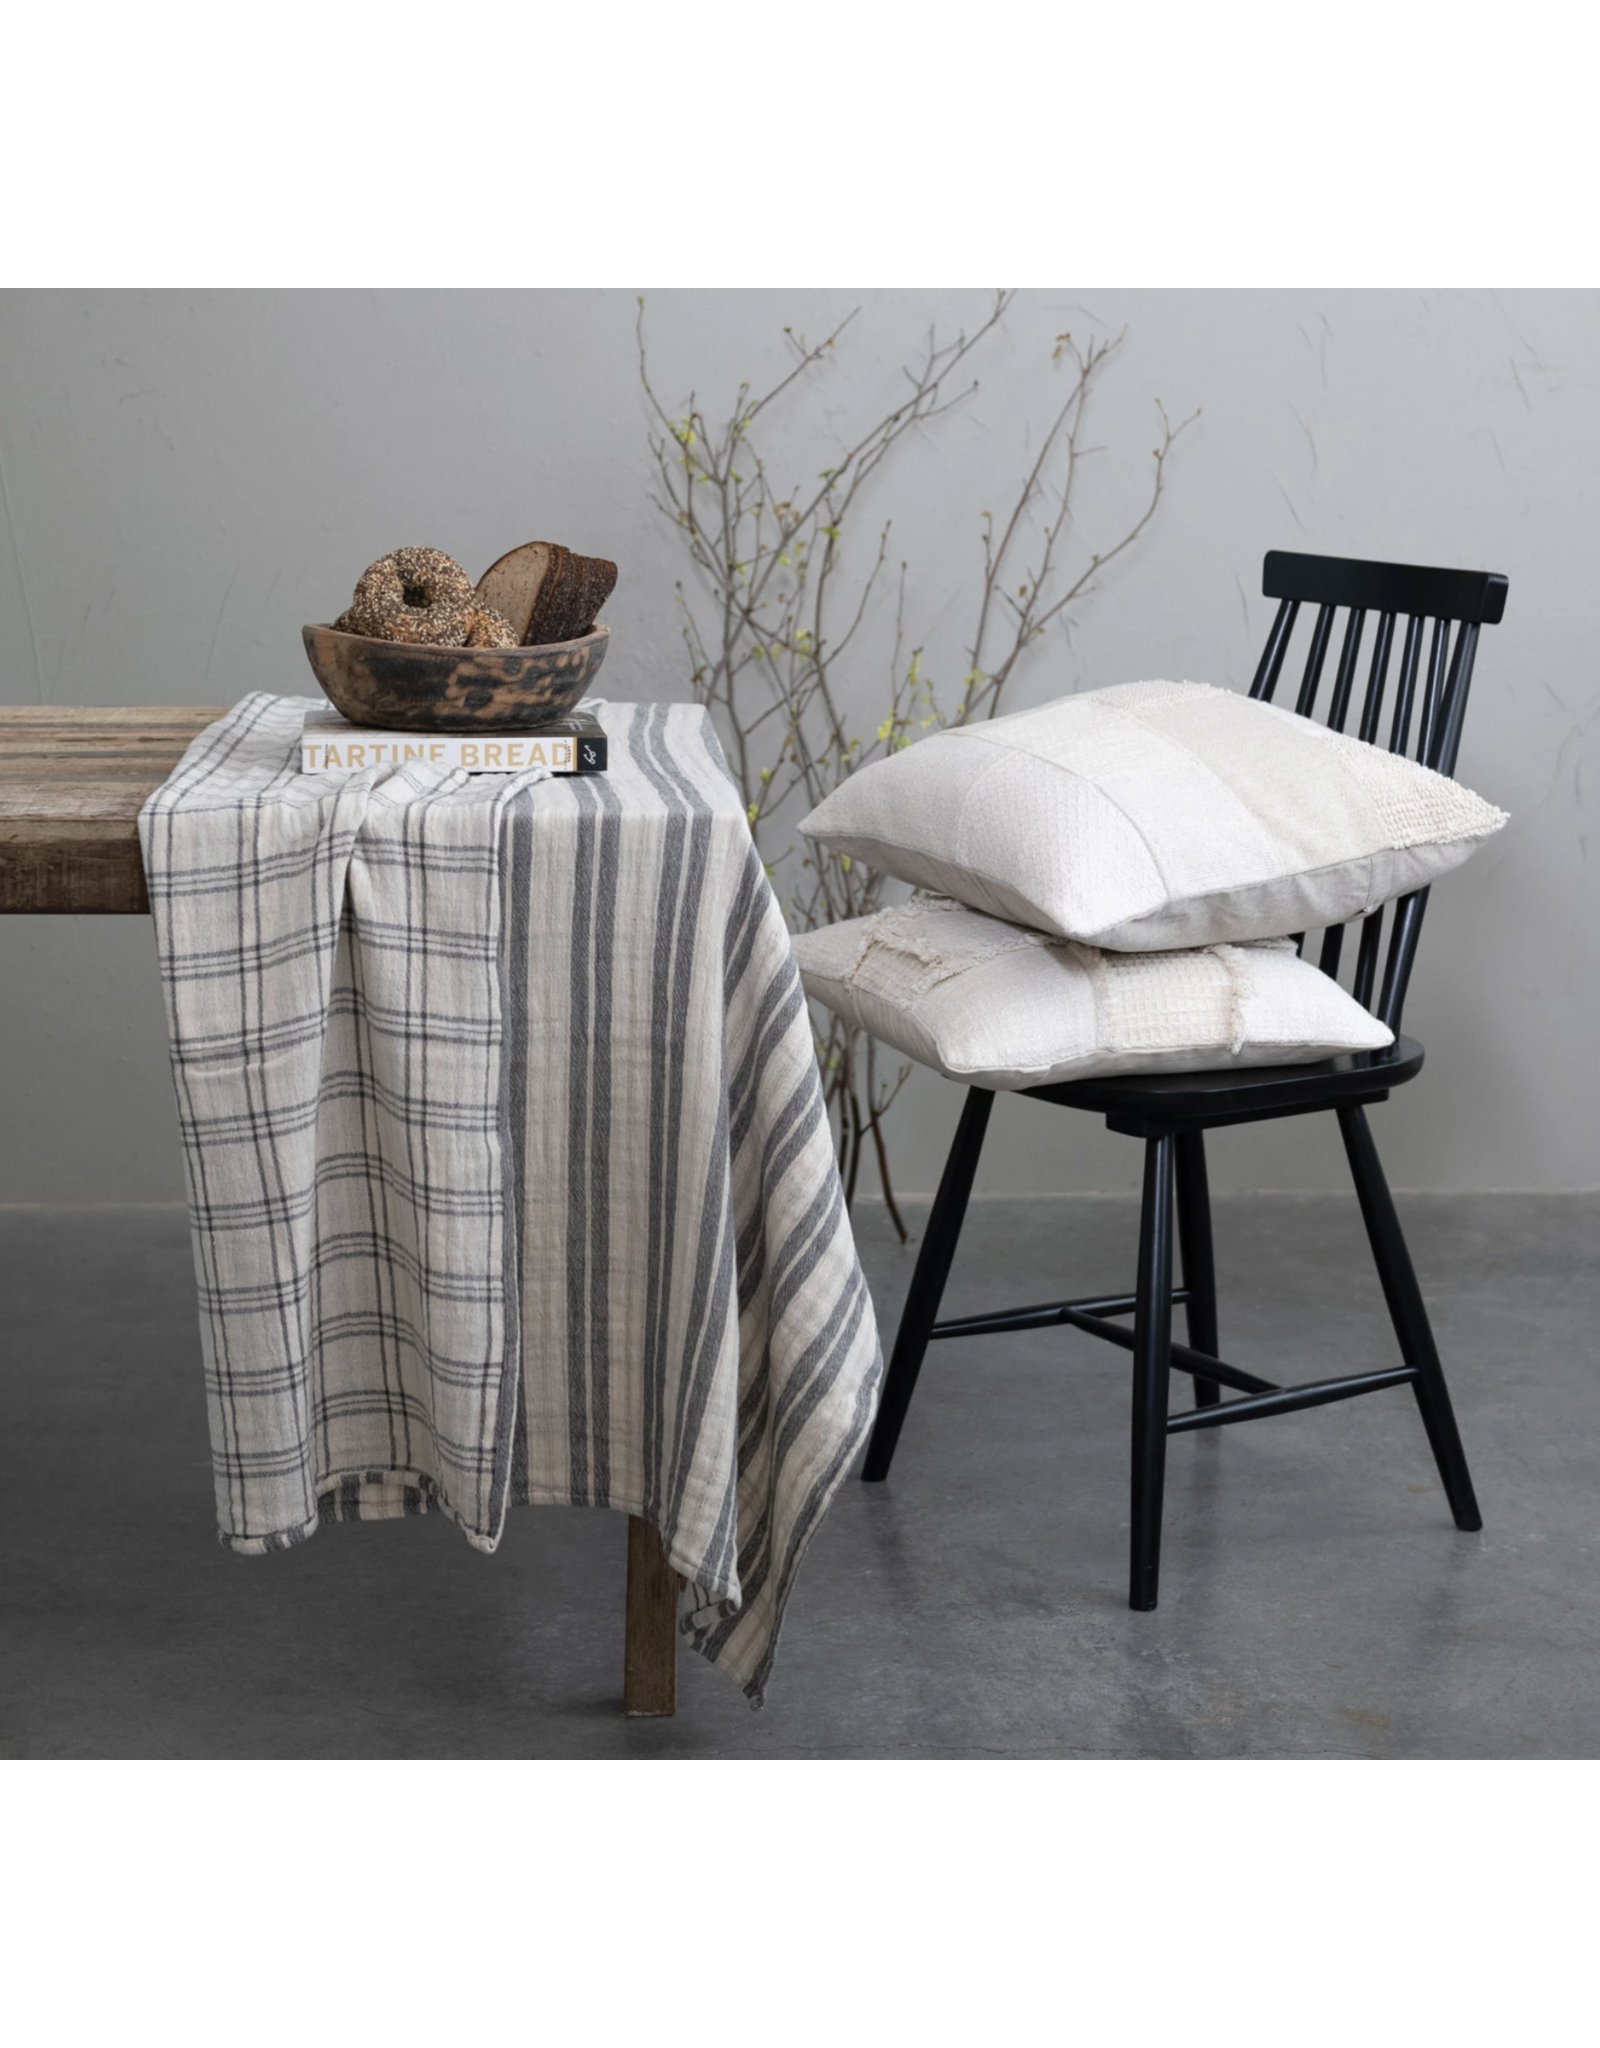 Creative Co-Op Stripe/Plaid Double Sided Cloth Tablecloth